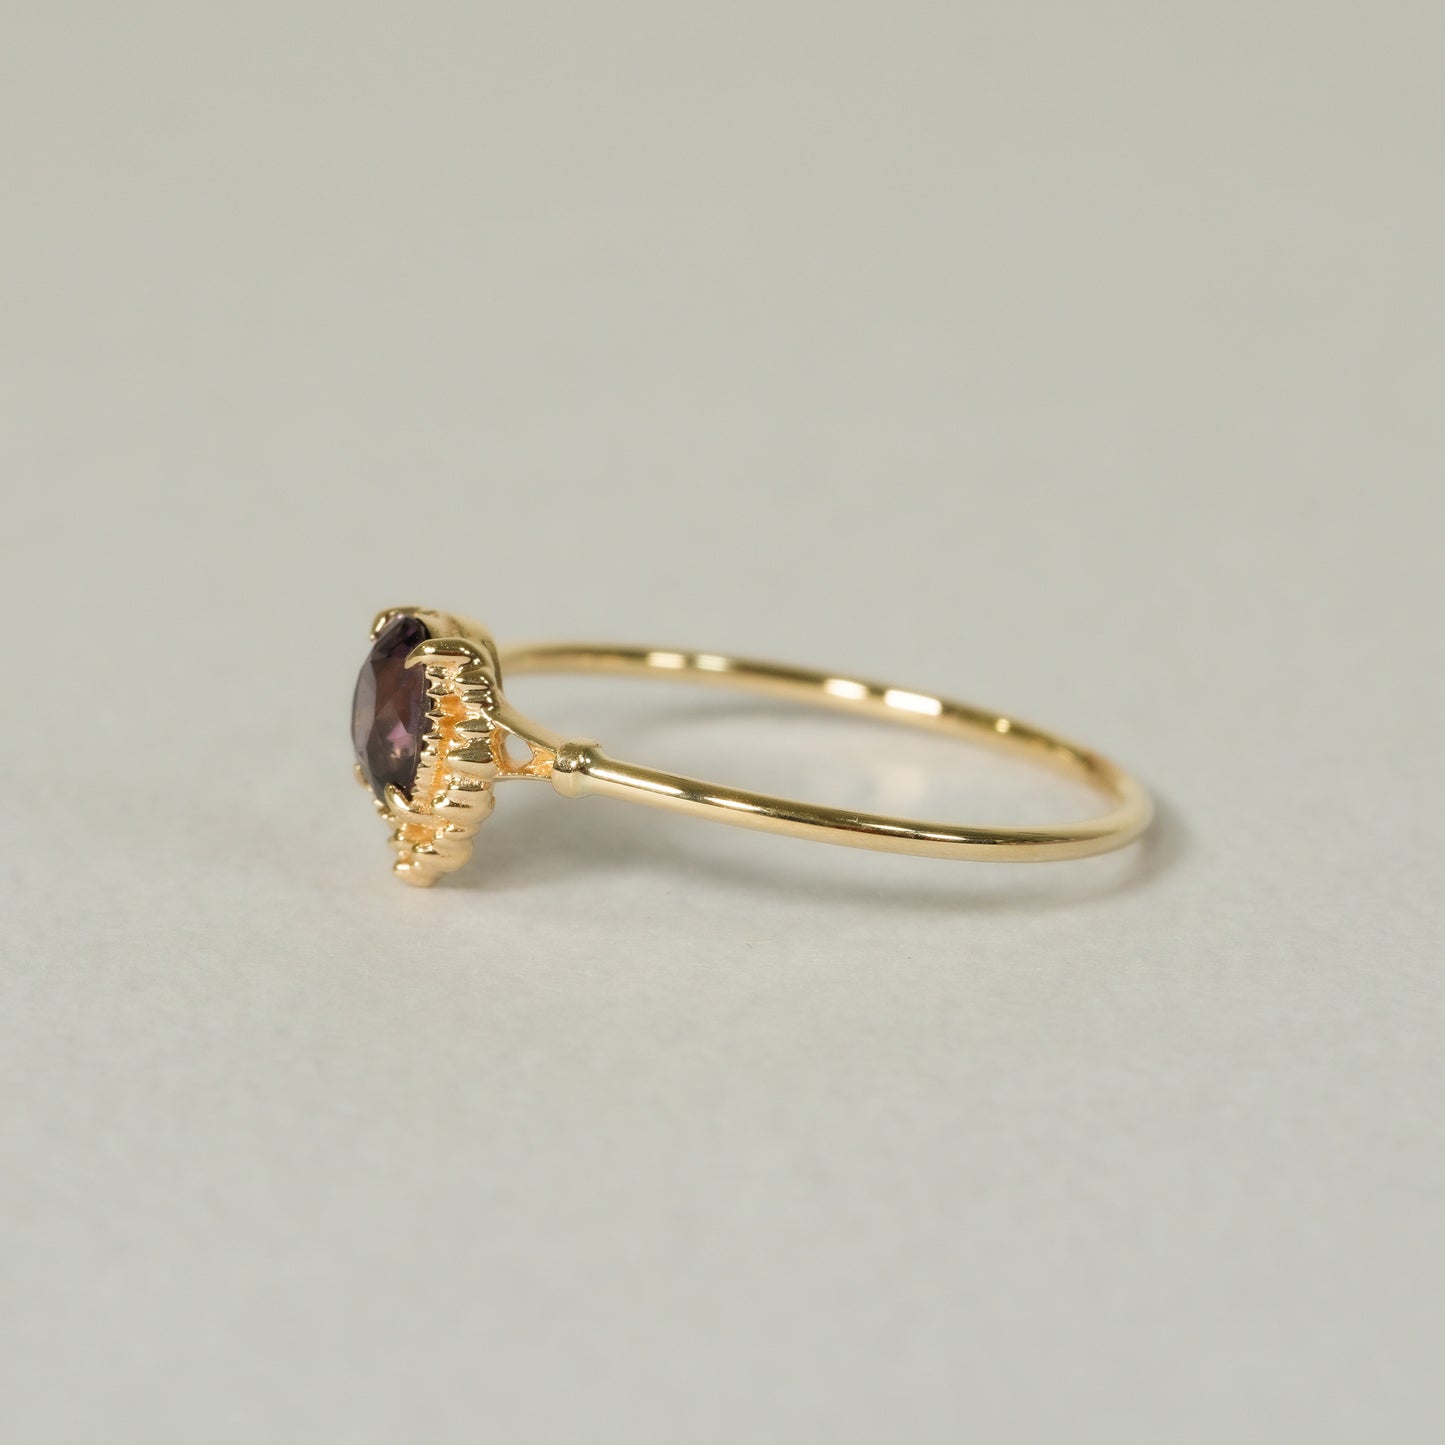 1485 Purple Spinel / Ring